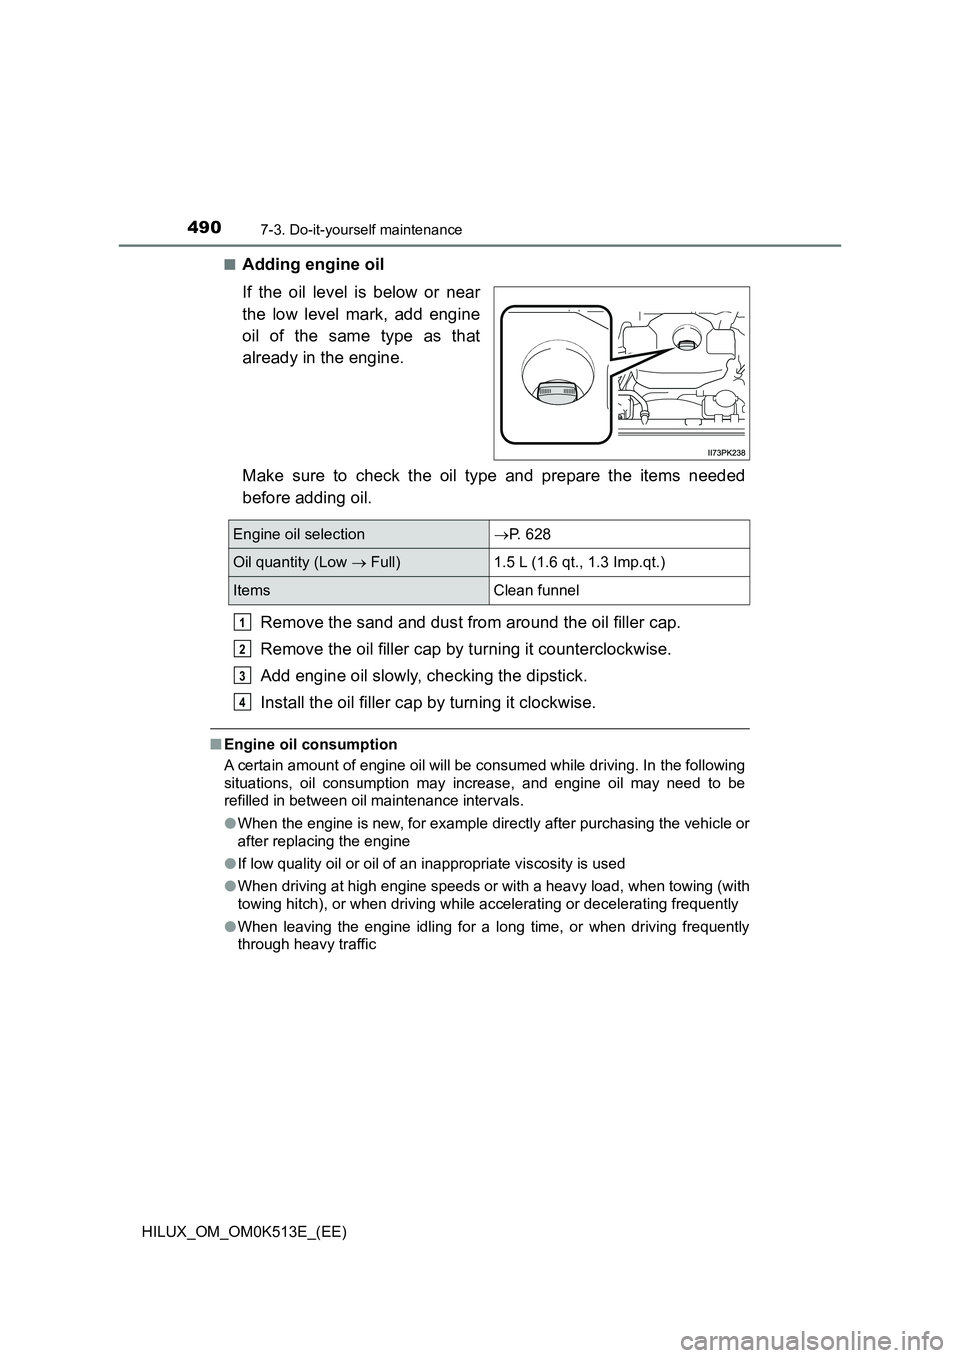 TOYOTA HILUX 2021  Owners Manual (in English) 4907-3. Do-it-yourself maintenance
HILUX_OM_OM0K513E_(EE) 
�QAdding engine oil 
If the oil level is below or near 
the low level mark, add engine 
oil of the same type as that 
already in the engine. 